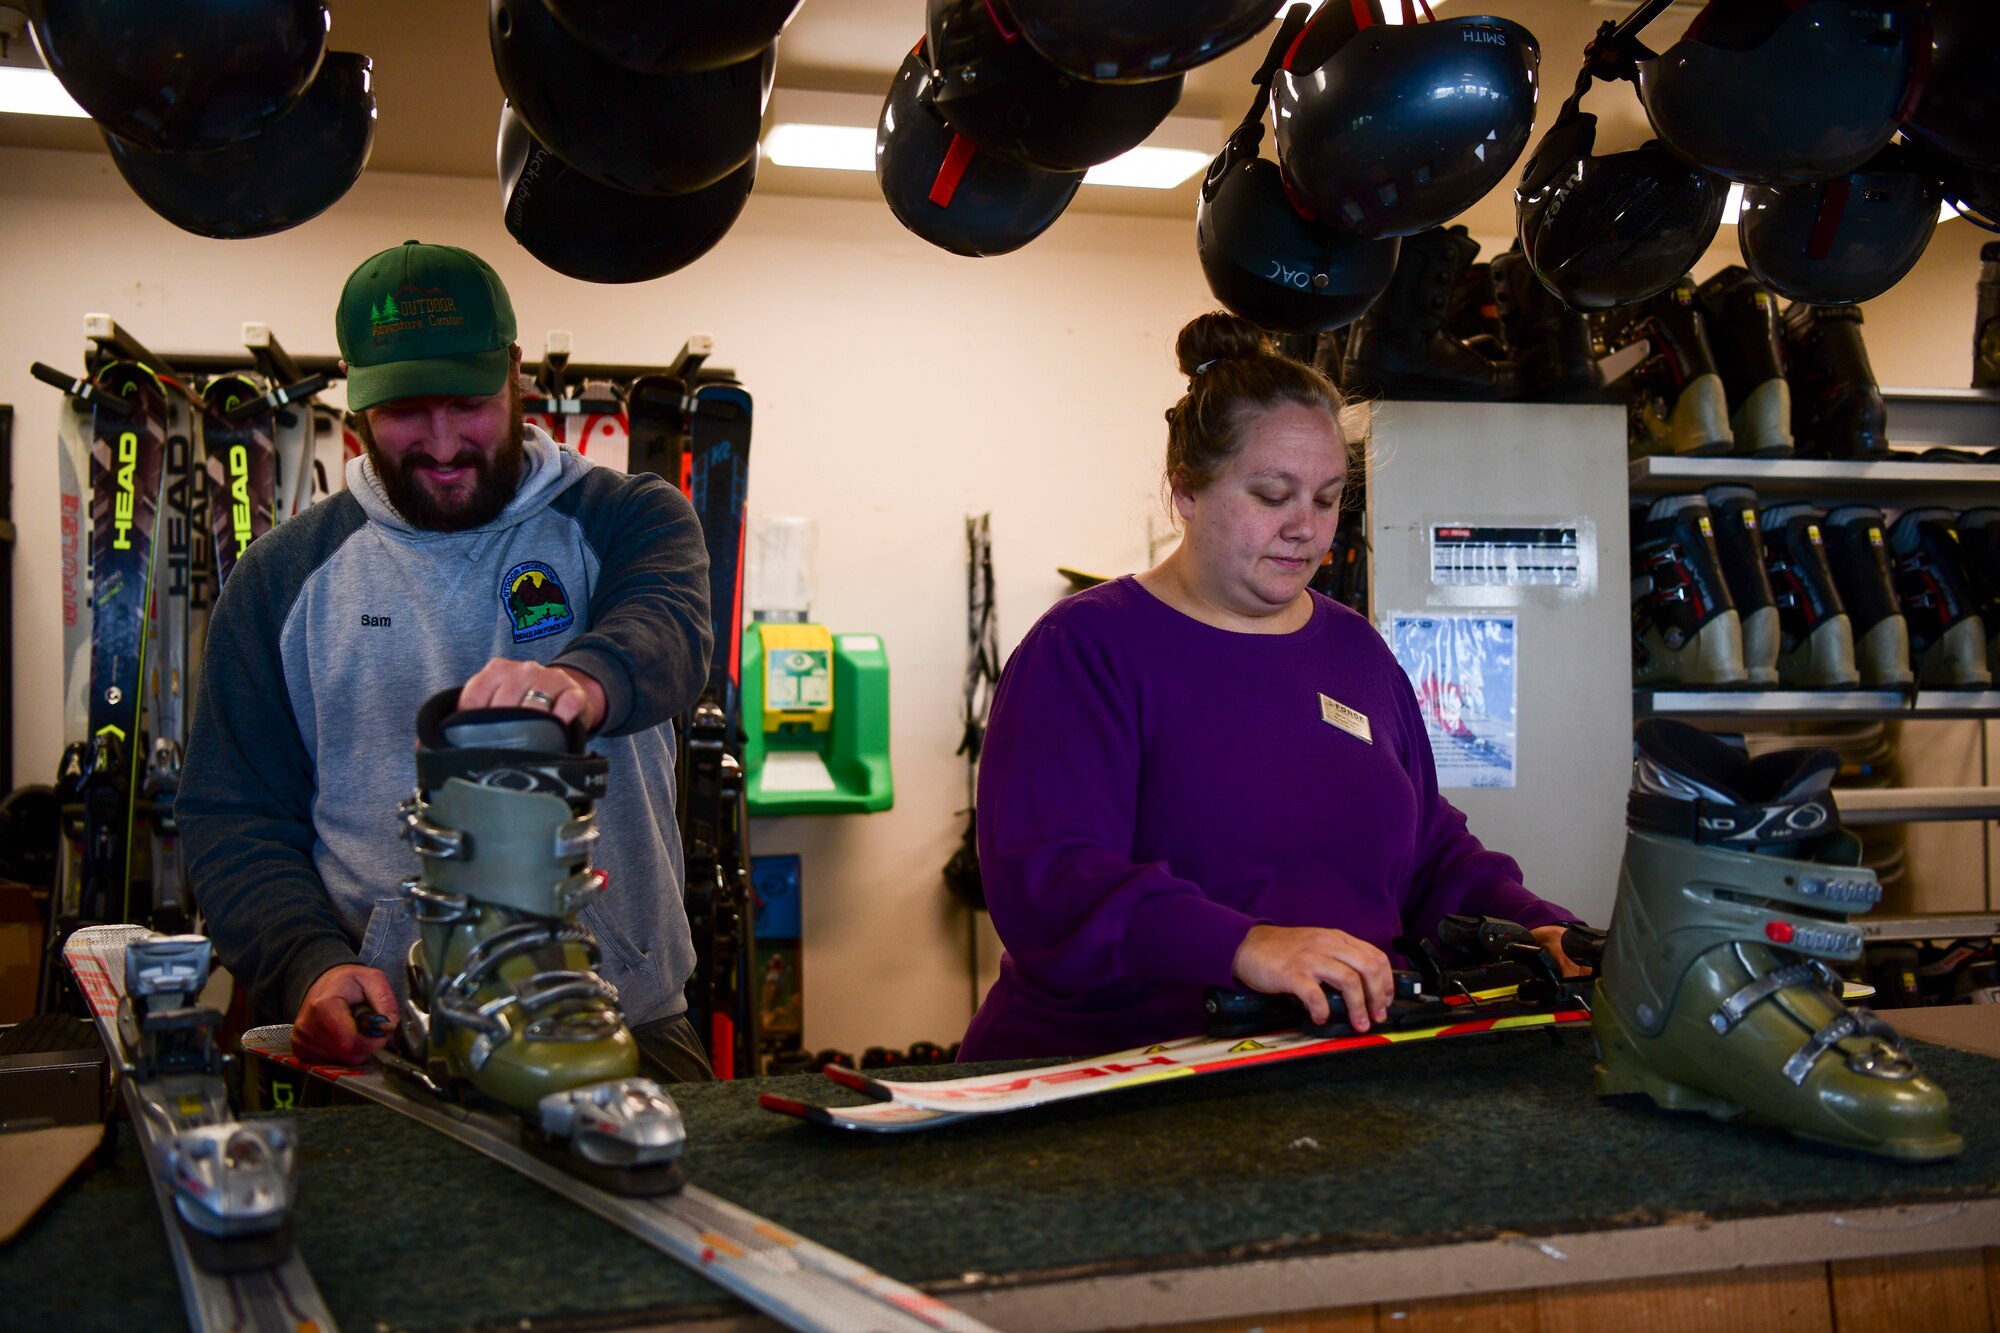 Samuel Carroll, 9th Force Support Squadron outdoor programmer and Ashlie Giesick, 9th Force Support Squadron recreation assistant work together on ski rentals at the outdoor recreation center at Beale Air Force Base